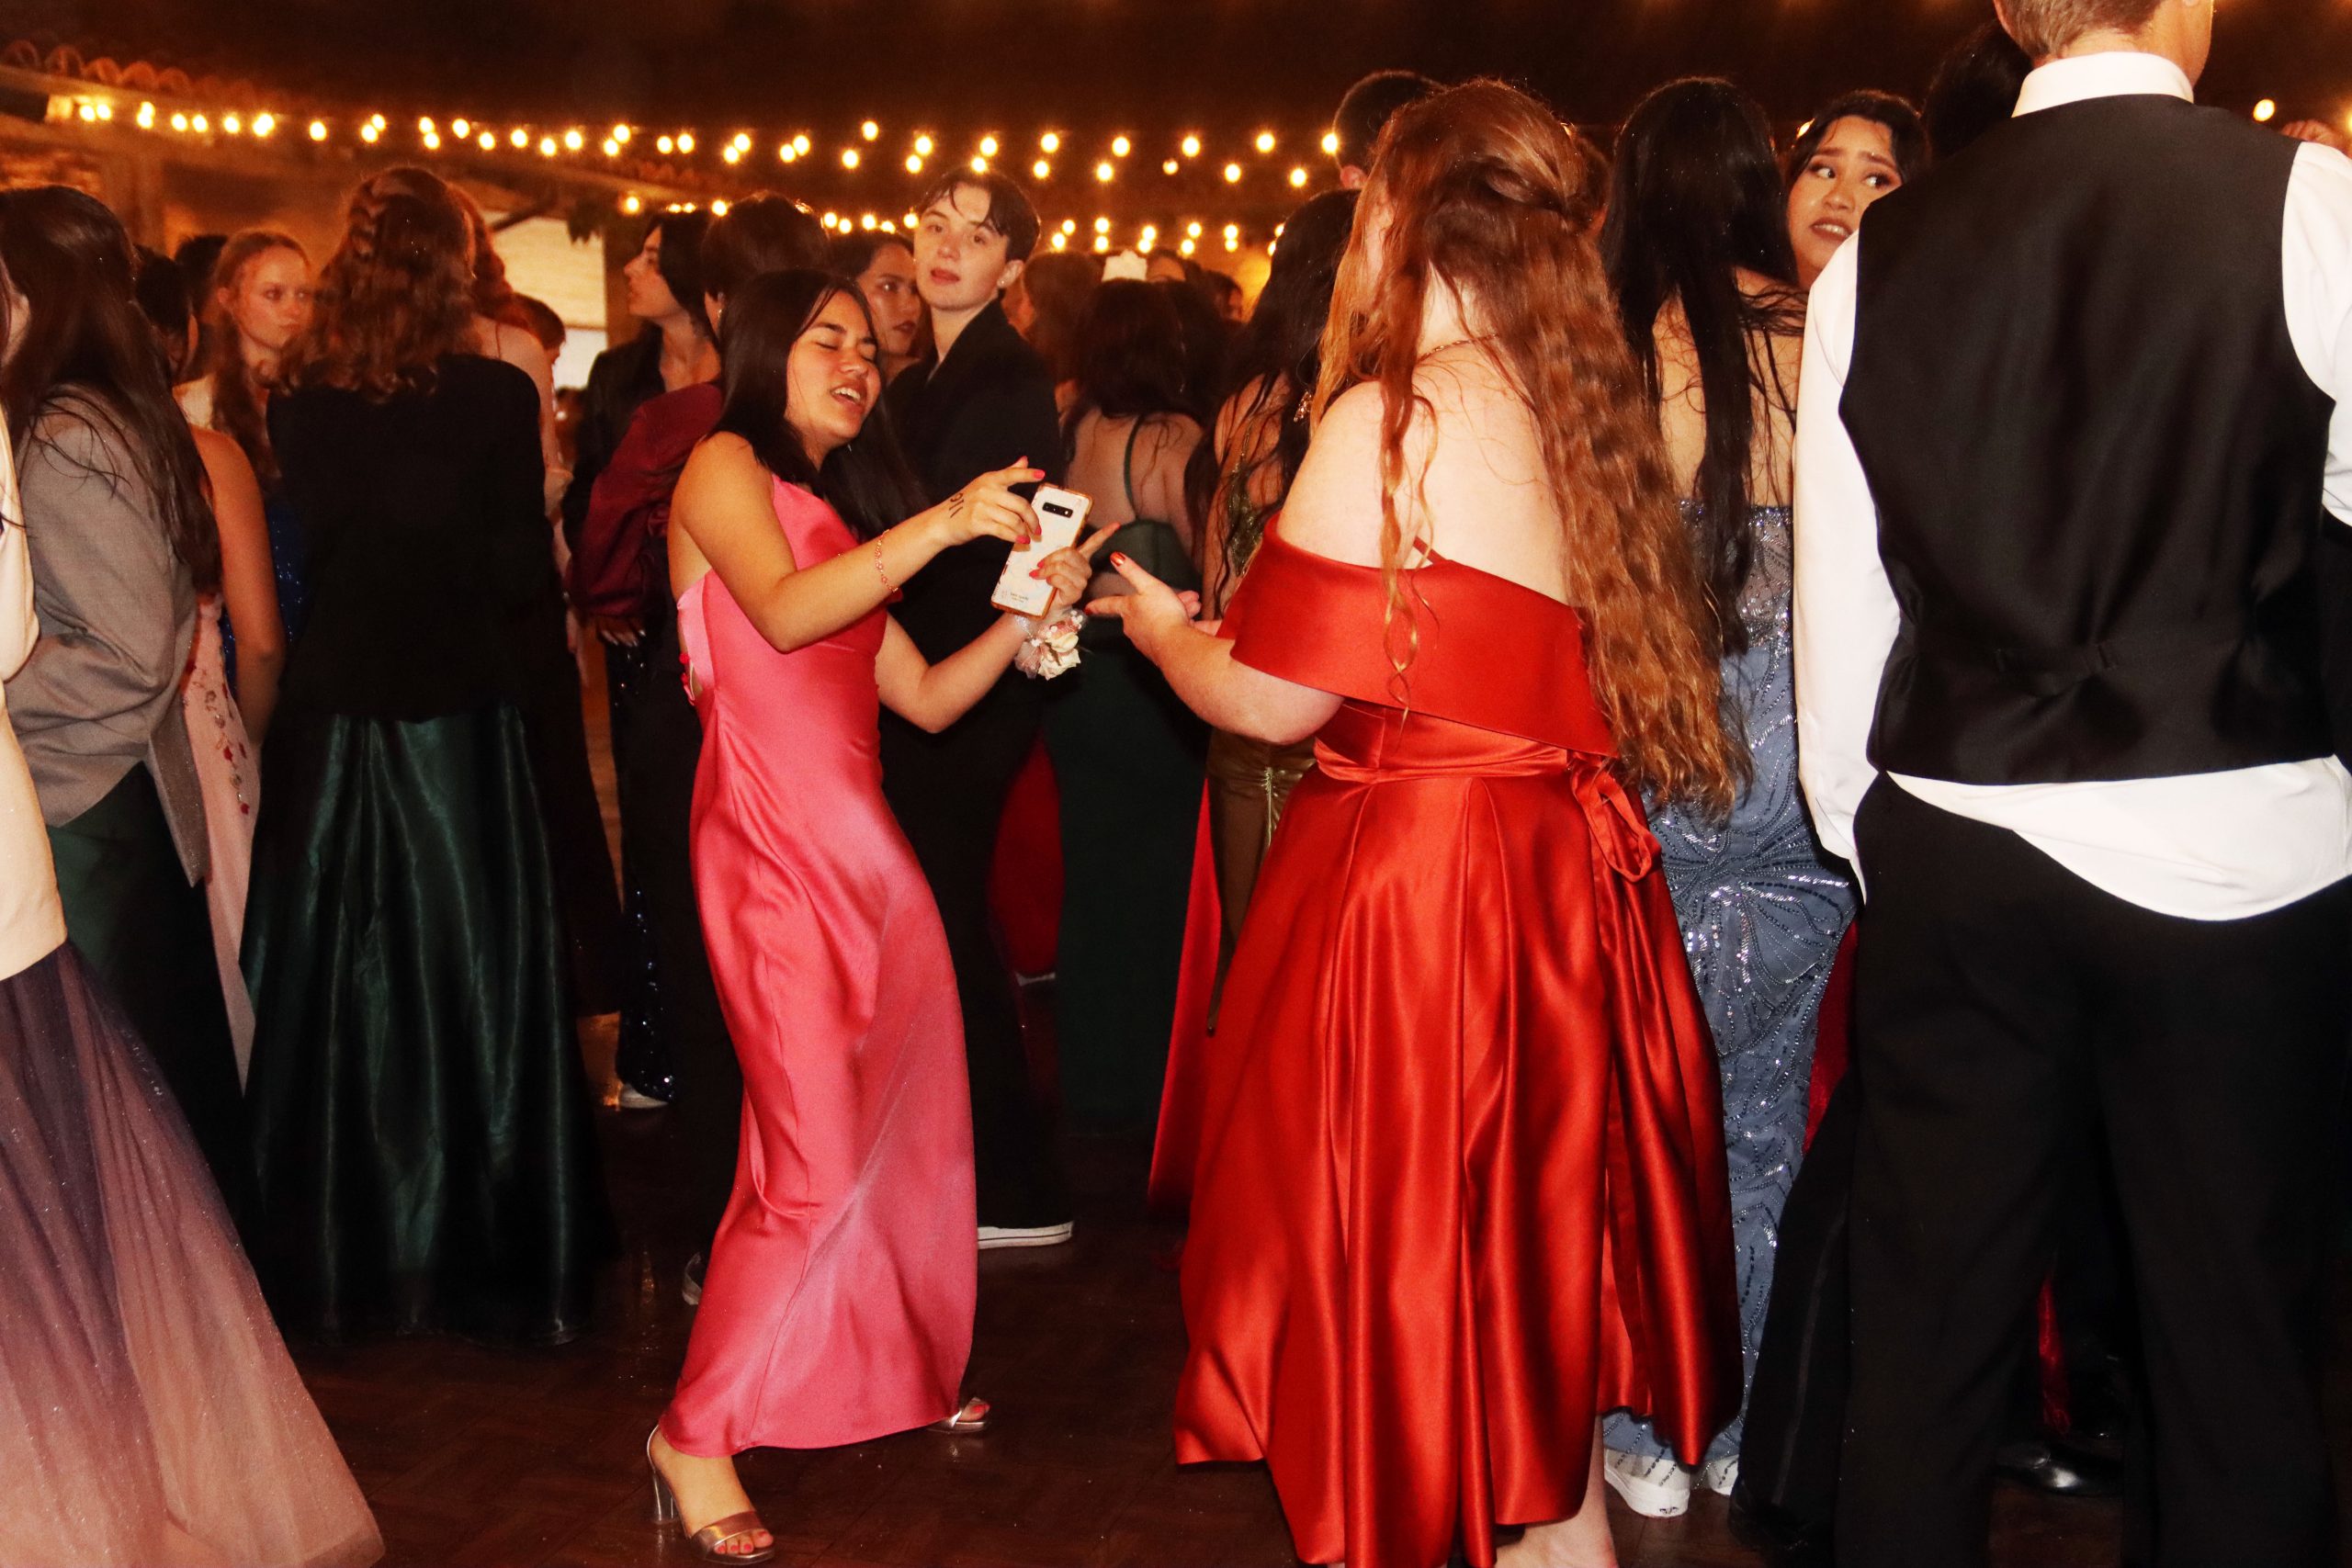 Students dance along to the music at Prom. Prom was held at the Santa Barbara Historical Museum.